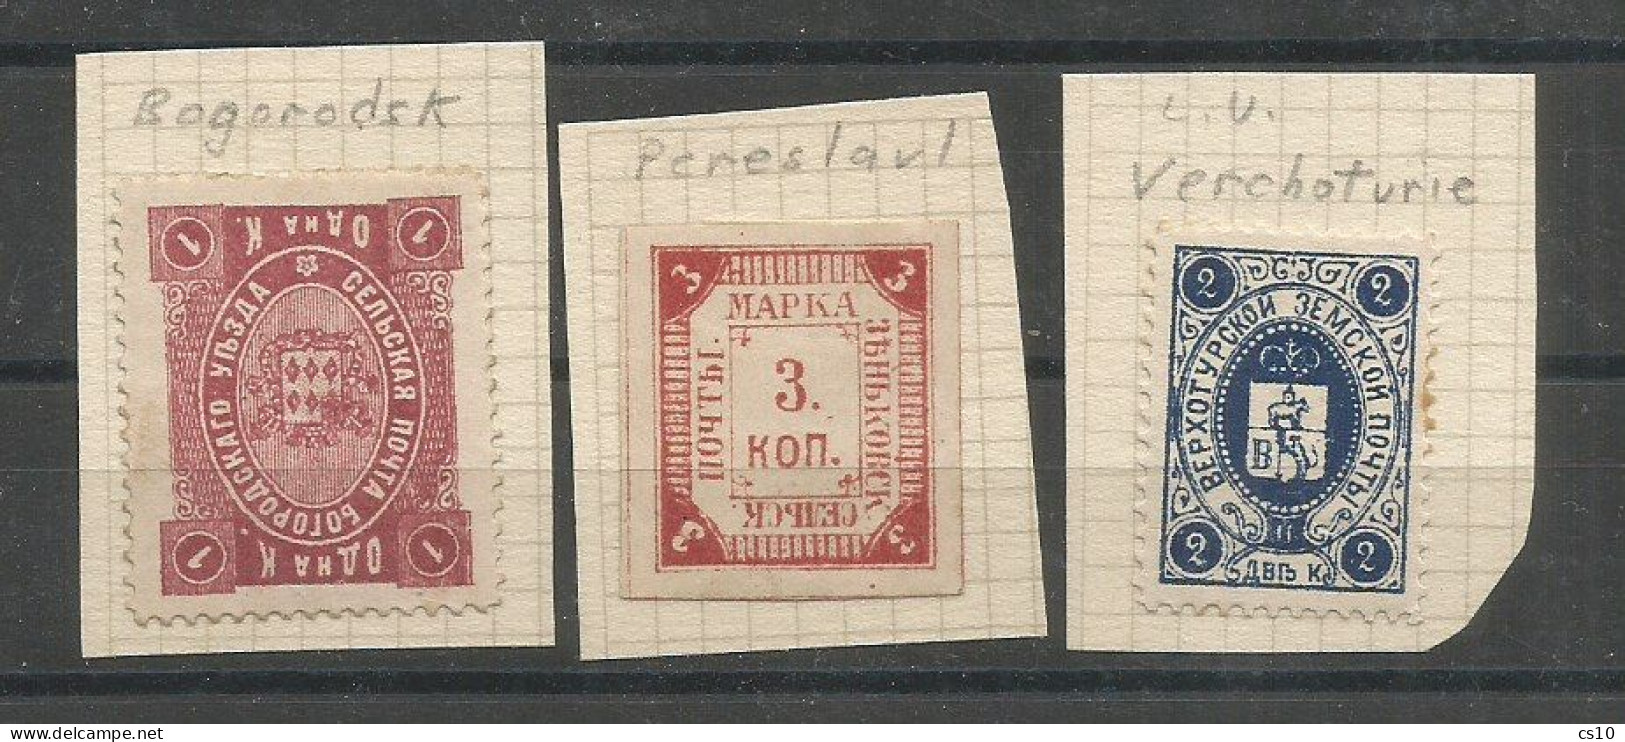 Old Russia Empire & Area #13 Scans Study Lot Of 490 Pcs Mint/Used Including Suomi Finland Levant, Some Piece, Imperf - Usati